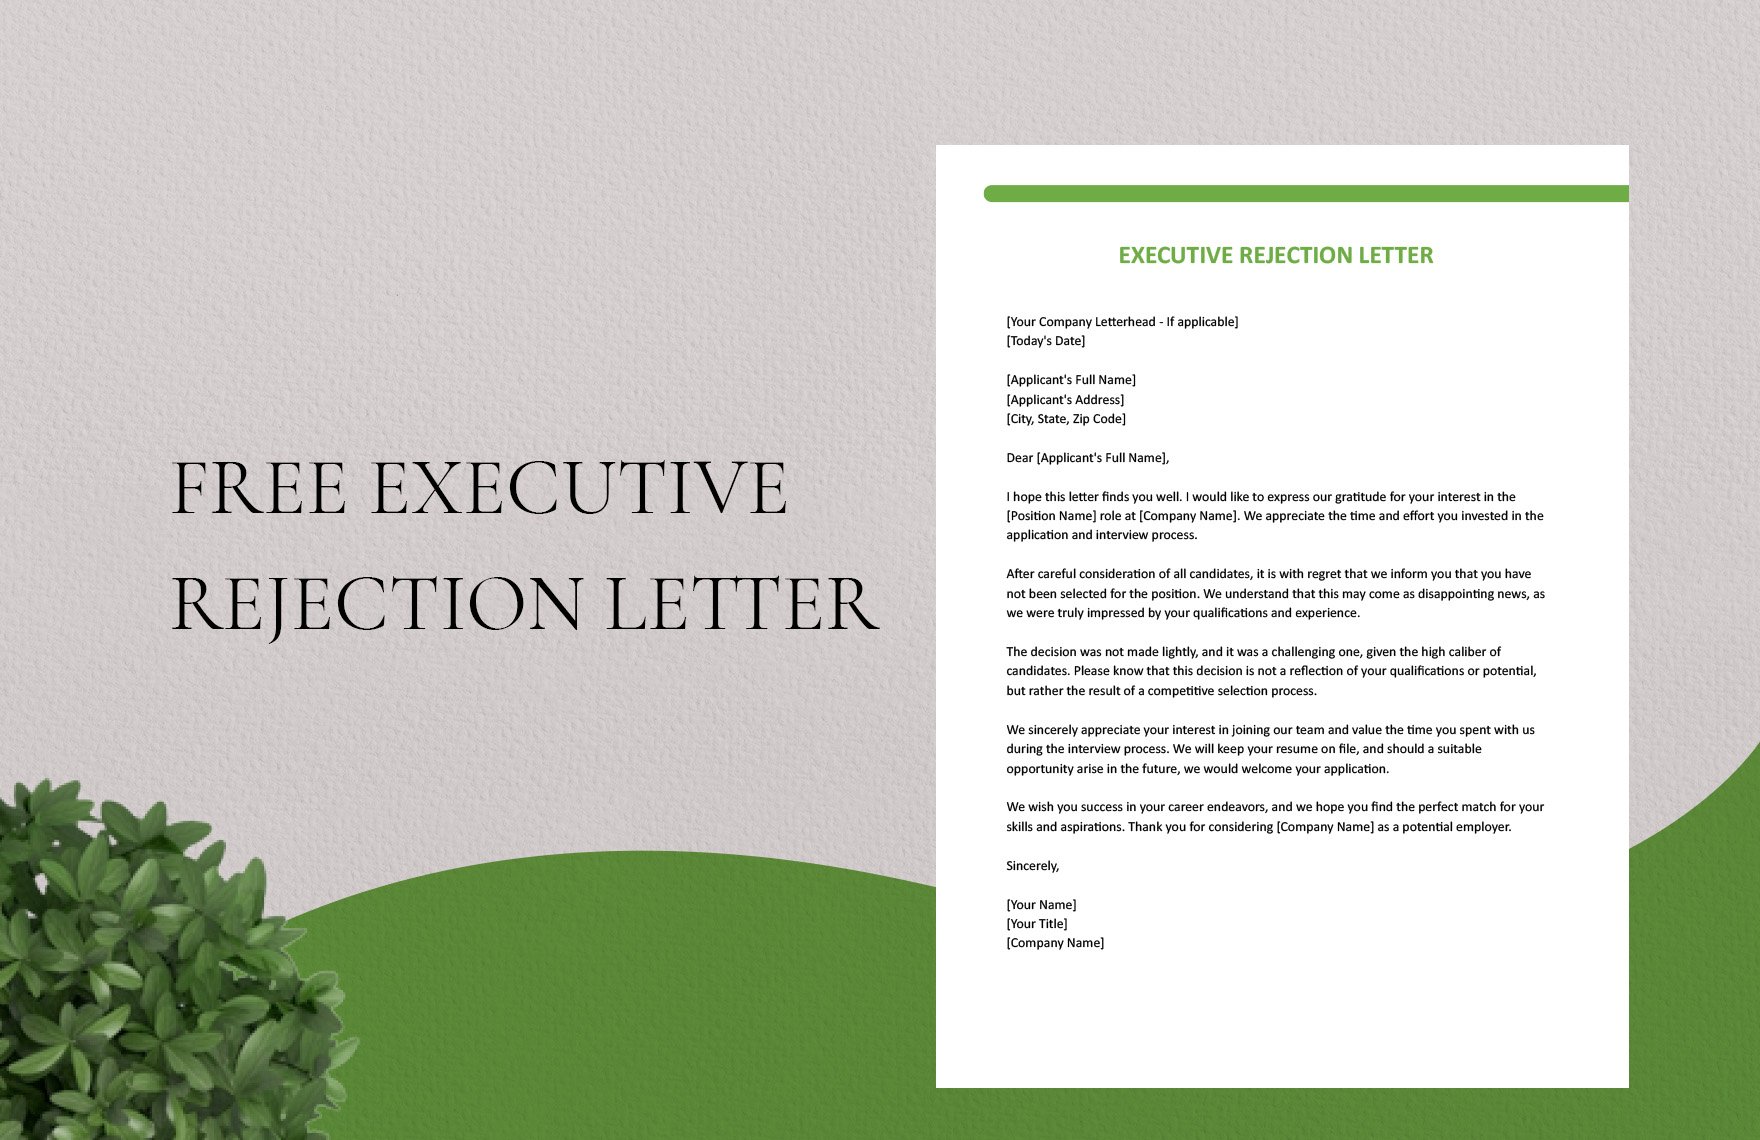 Executive Rejection Letter